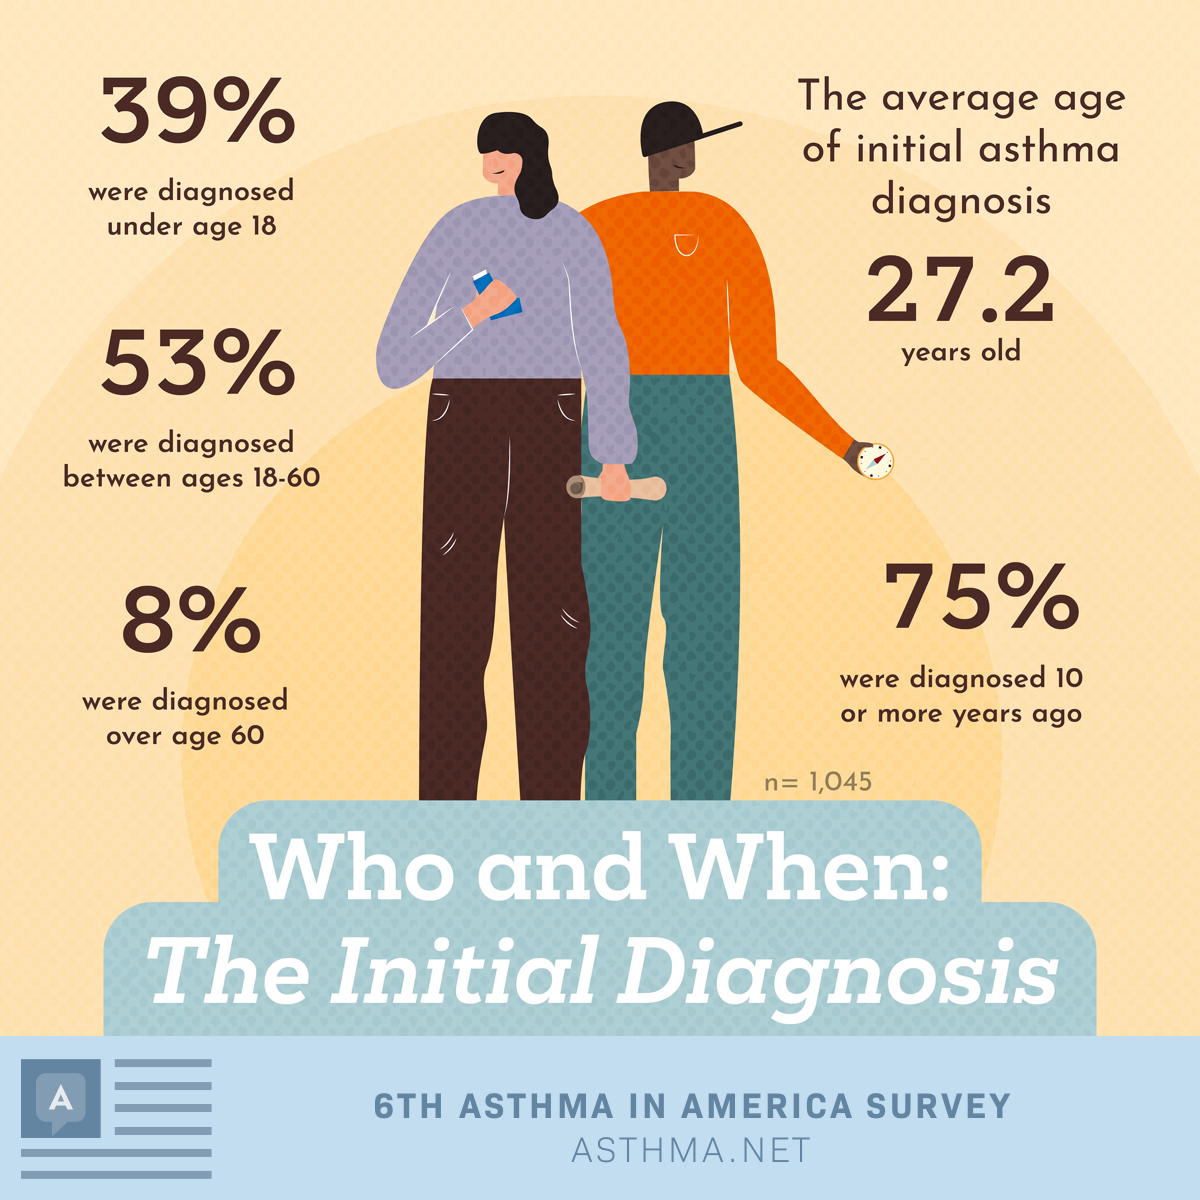 The Initial Diagnosis: Average age of diagnosis equals 27.2 years old, 75% of participants were diagnosed ten or more years ago, 8% were diagnosed over age 60, 53% were diagnosed between ages 18-60, 39% diagnosed under age 18. style=